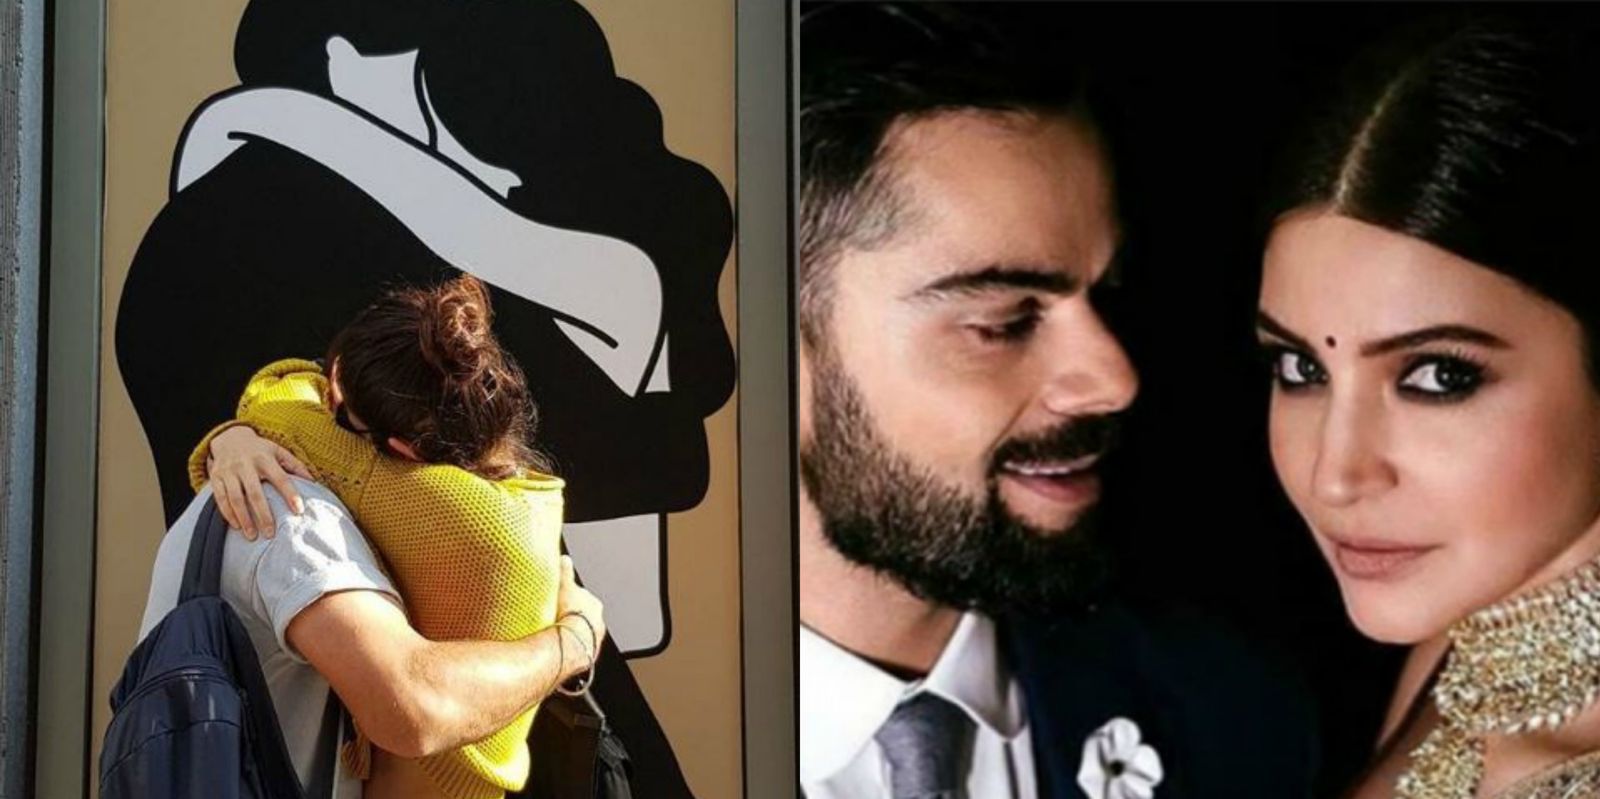 Virat Kohli Just Shared The Most Romantic Picture With His 'One And Only' Anushka Sharma